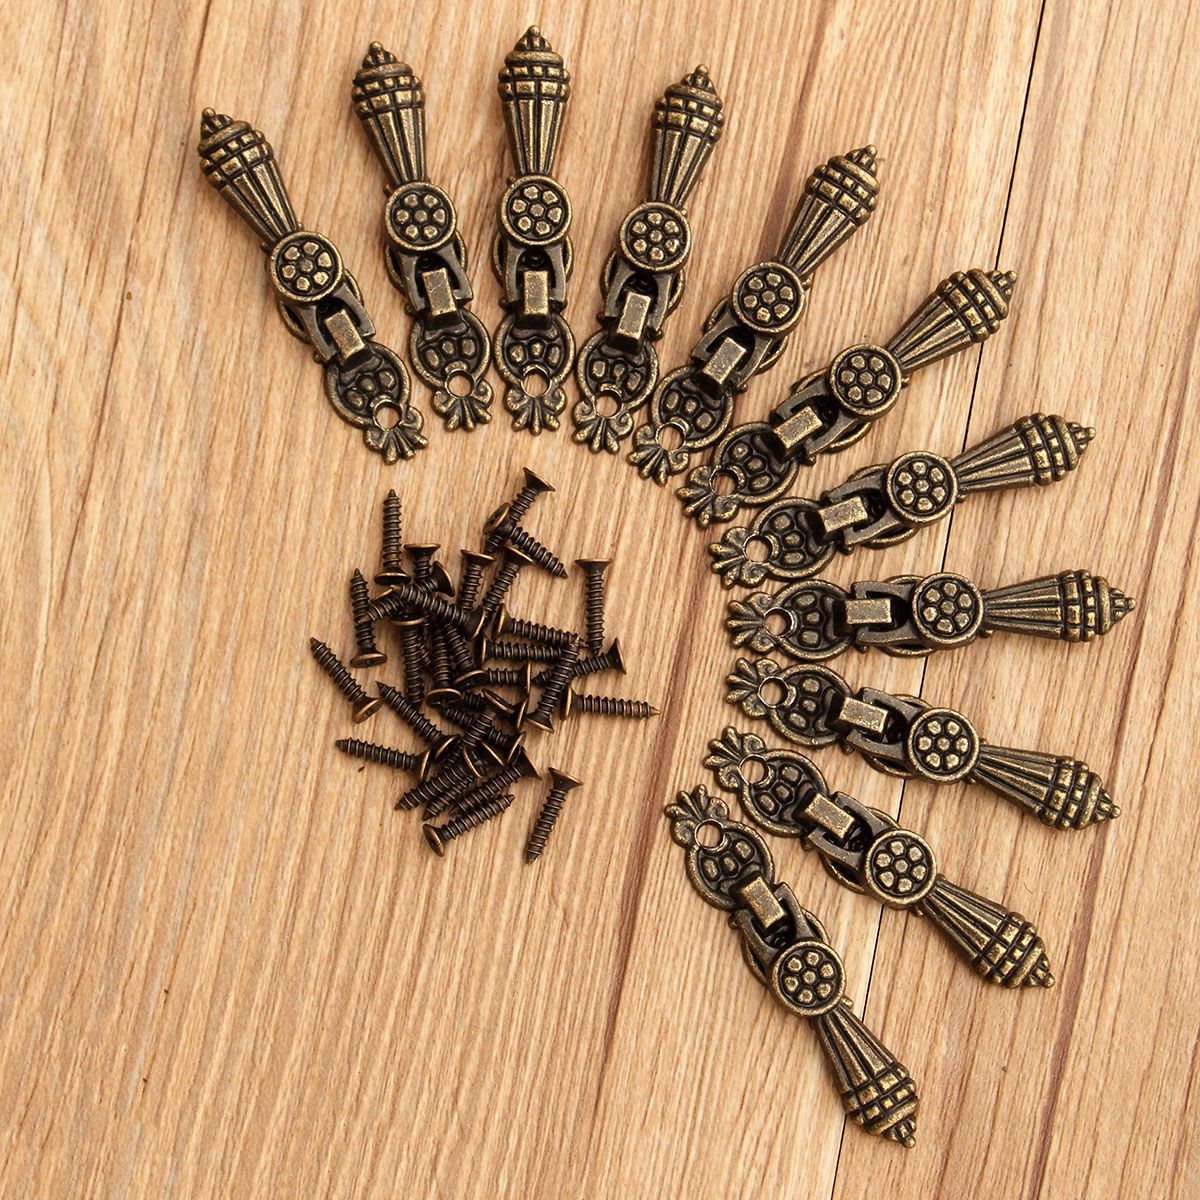 10pcs--Antique-Drawer-Pull-Jewelry-Box-Handle-Wooden-Case-Cabinet-Knobs-1012660